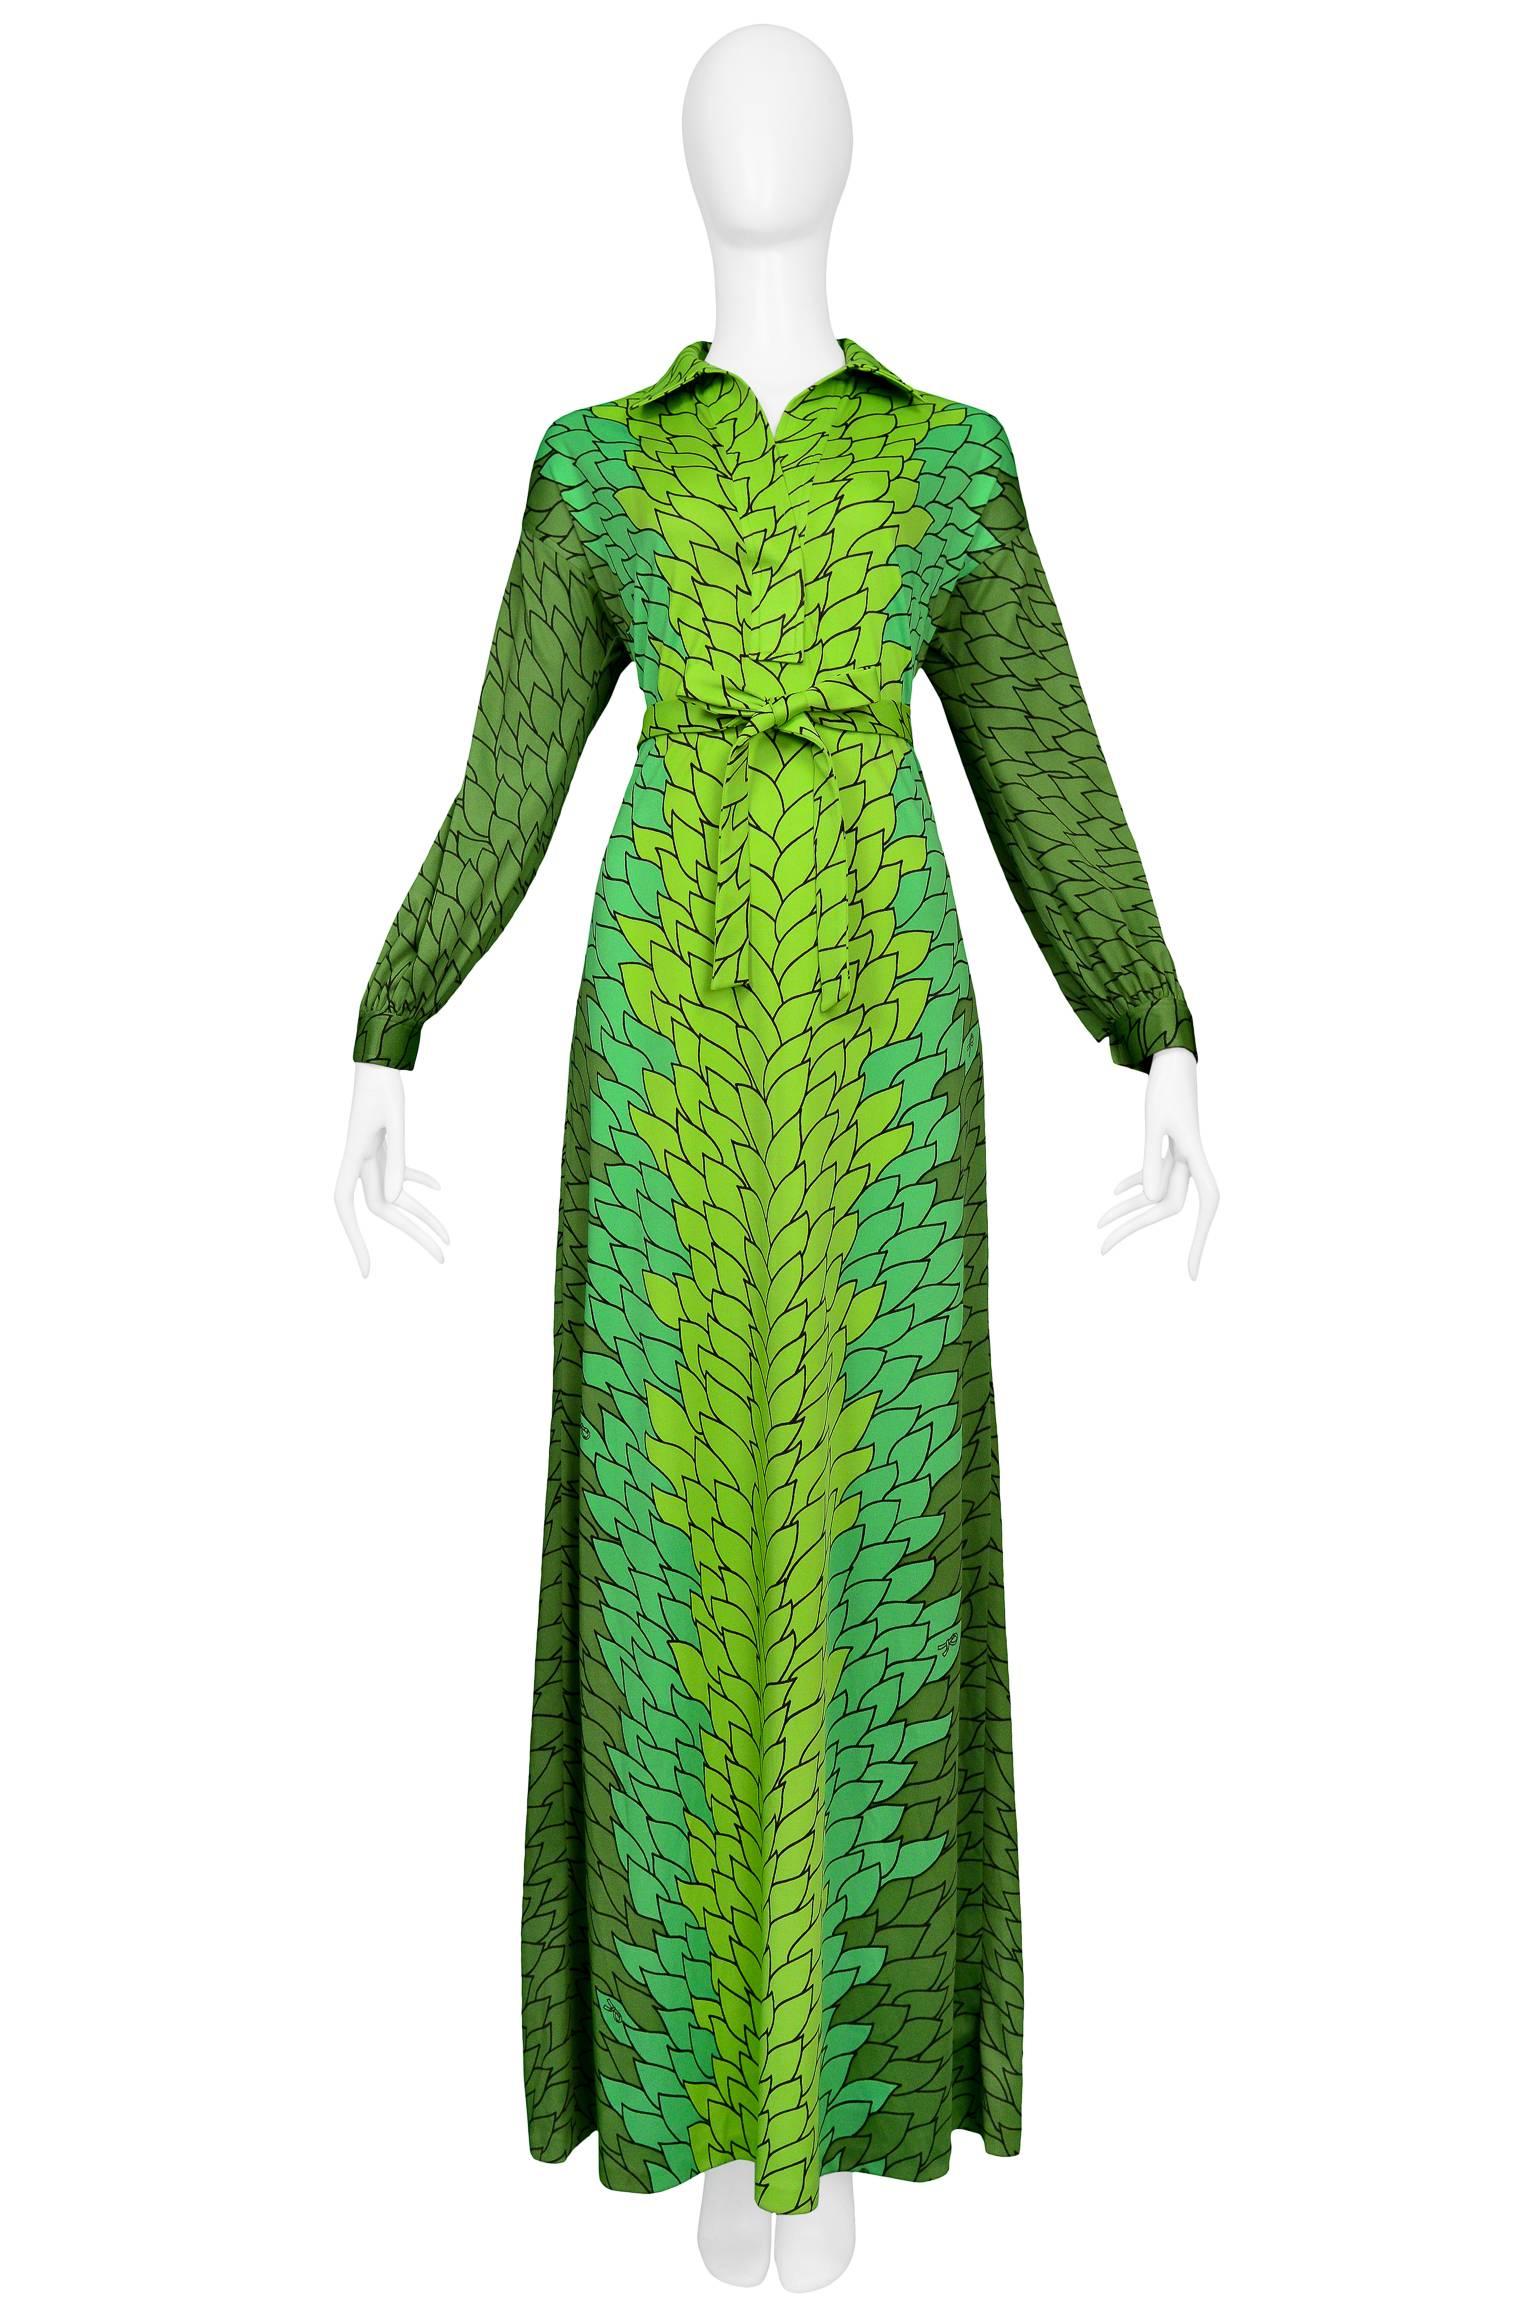 Vintage green leaf print Roberta di Camerino trompe l'oeil jersey maxi dress with sleeves and matching belt. Dress features signature Roberta print and gold tone 